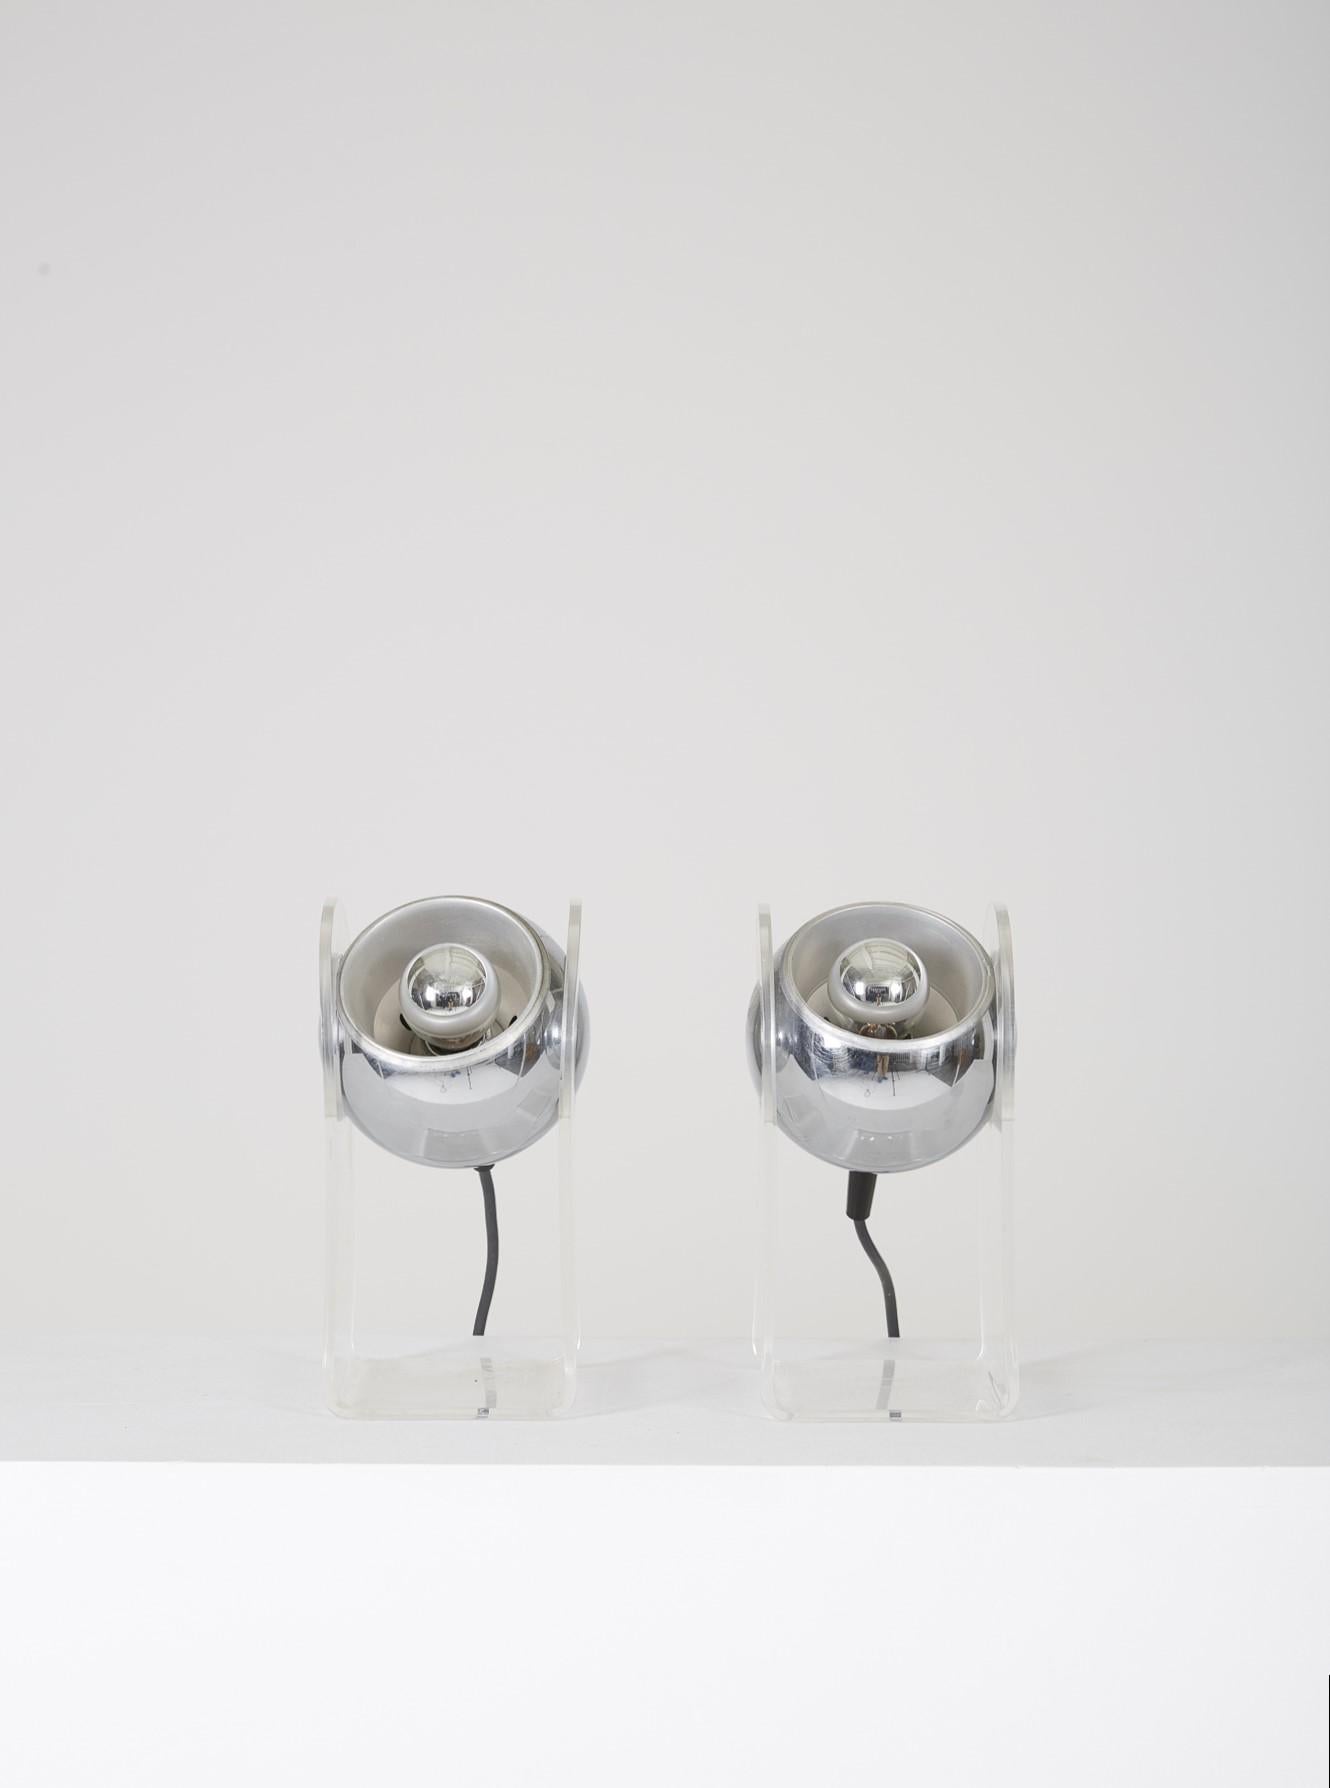 Pair of lamps model 540 by Gino Sarfatti for Arteluce, 1970s. Chrome plated metal and aluminum ball, plexiglass support. Very good condition with some traces of use. Functional electricity, European plug.
 